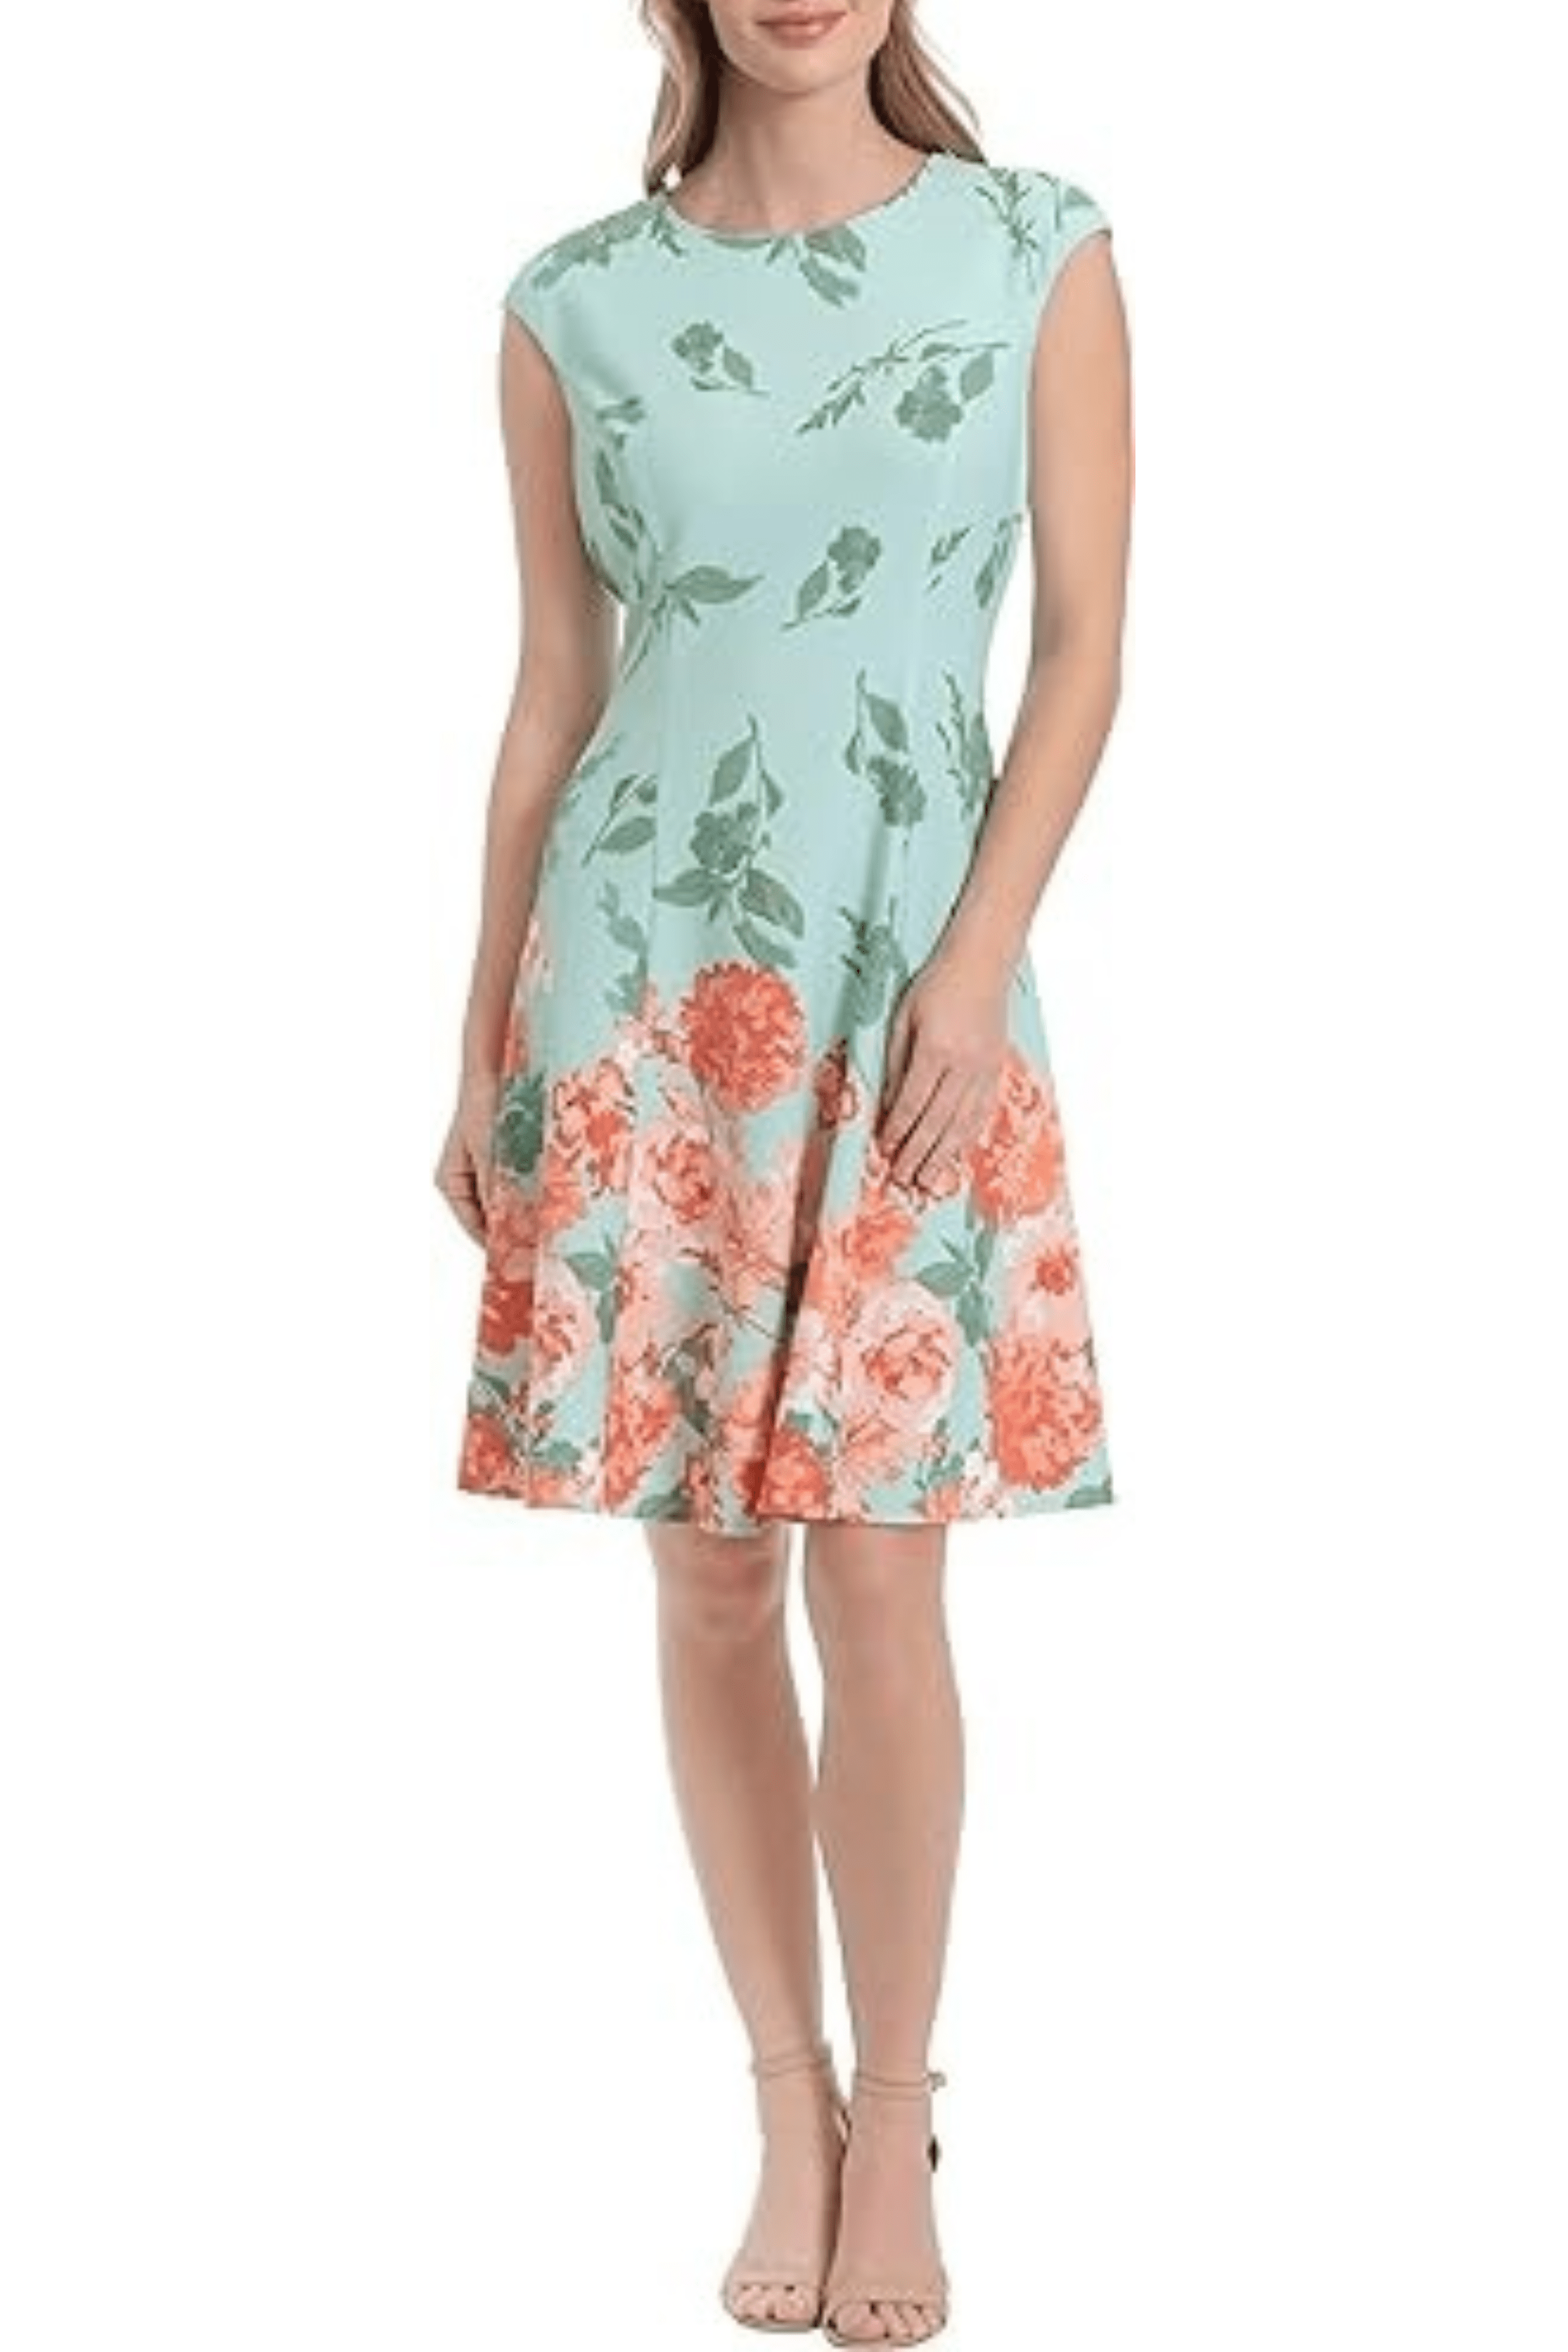 Image of London Times T6705M - Jewel Neck Floral Printed Cocktail Dress